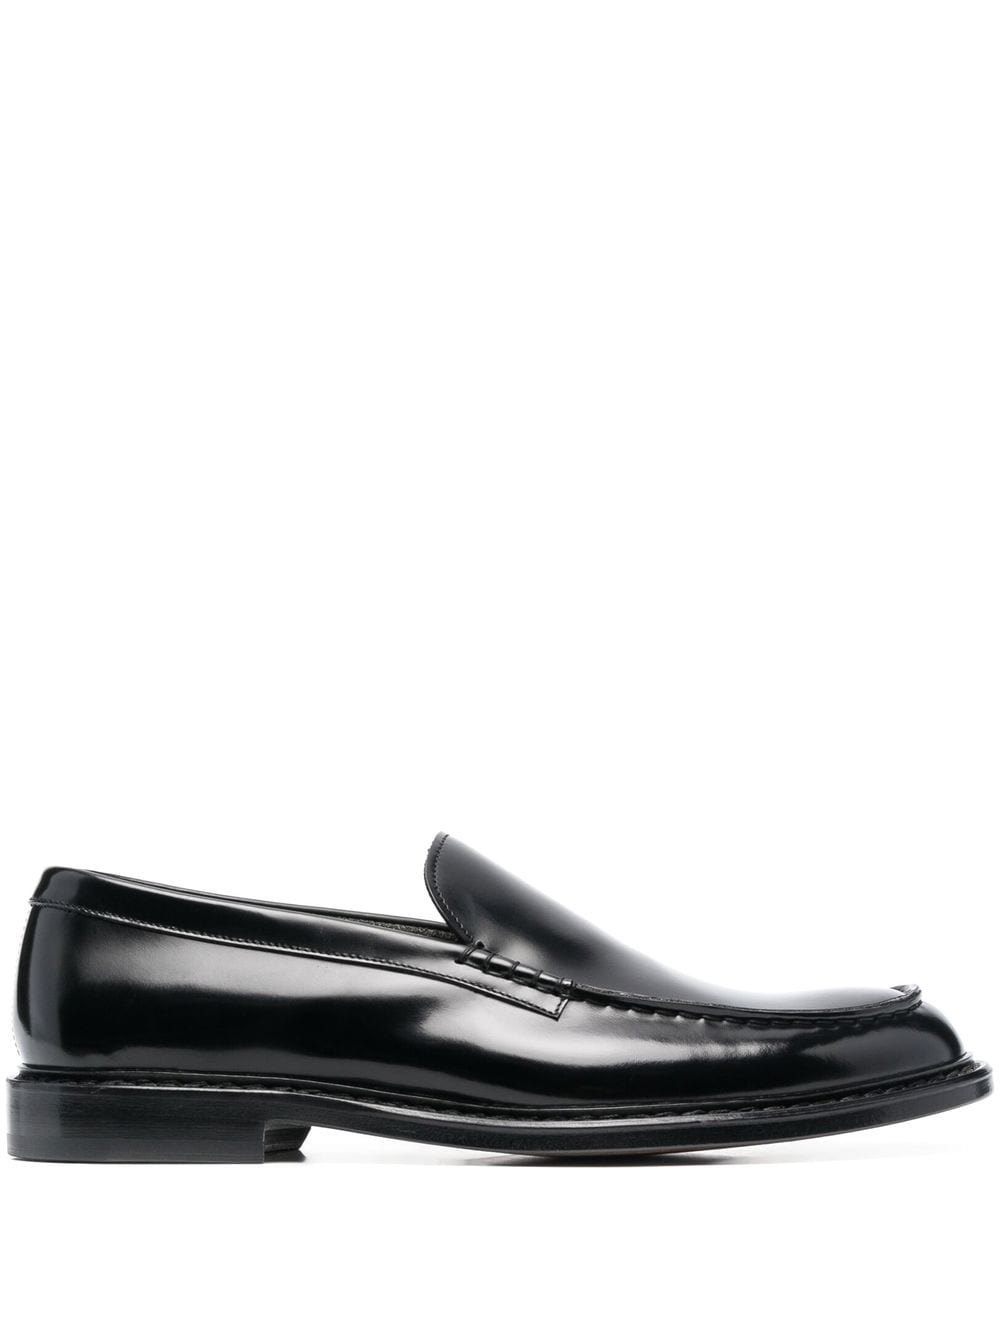 Doucal's almod-toe leather loafers - Black von Doucal's